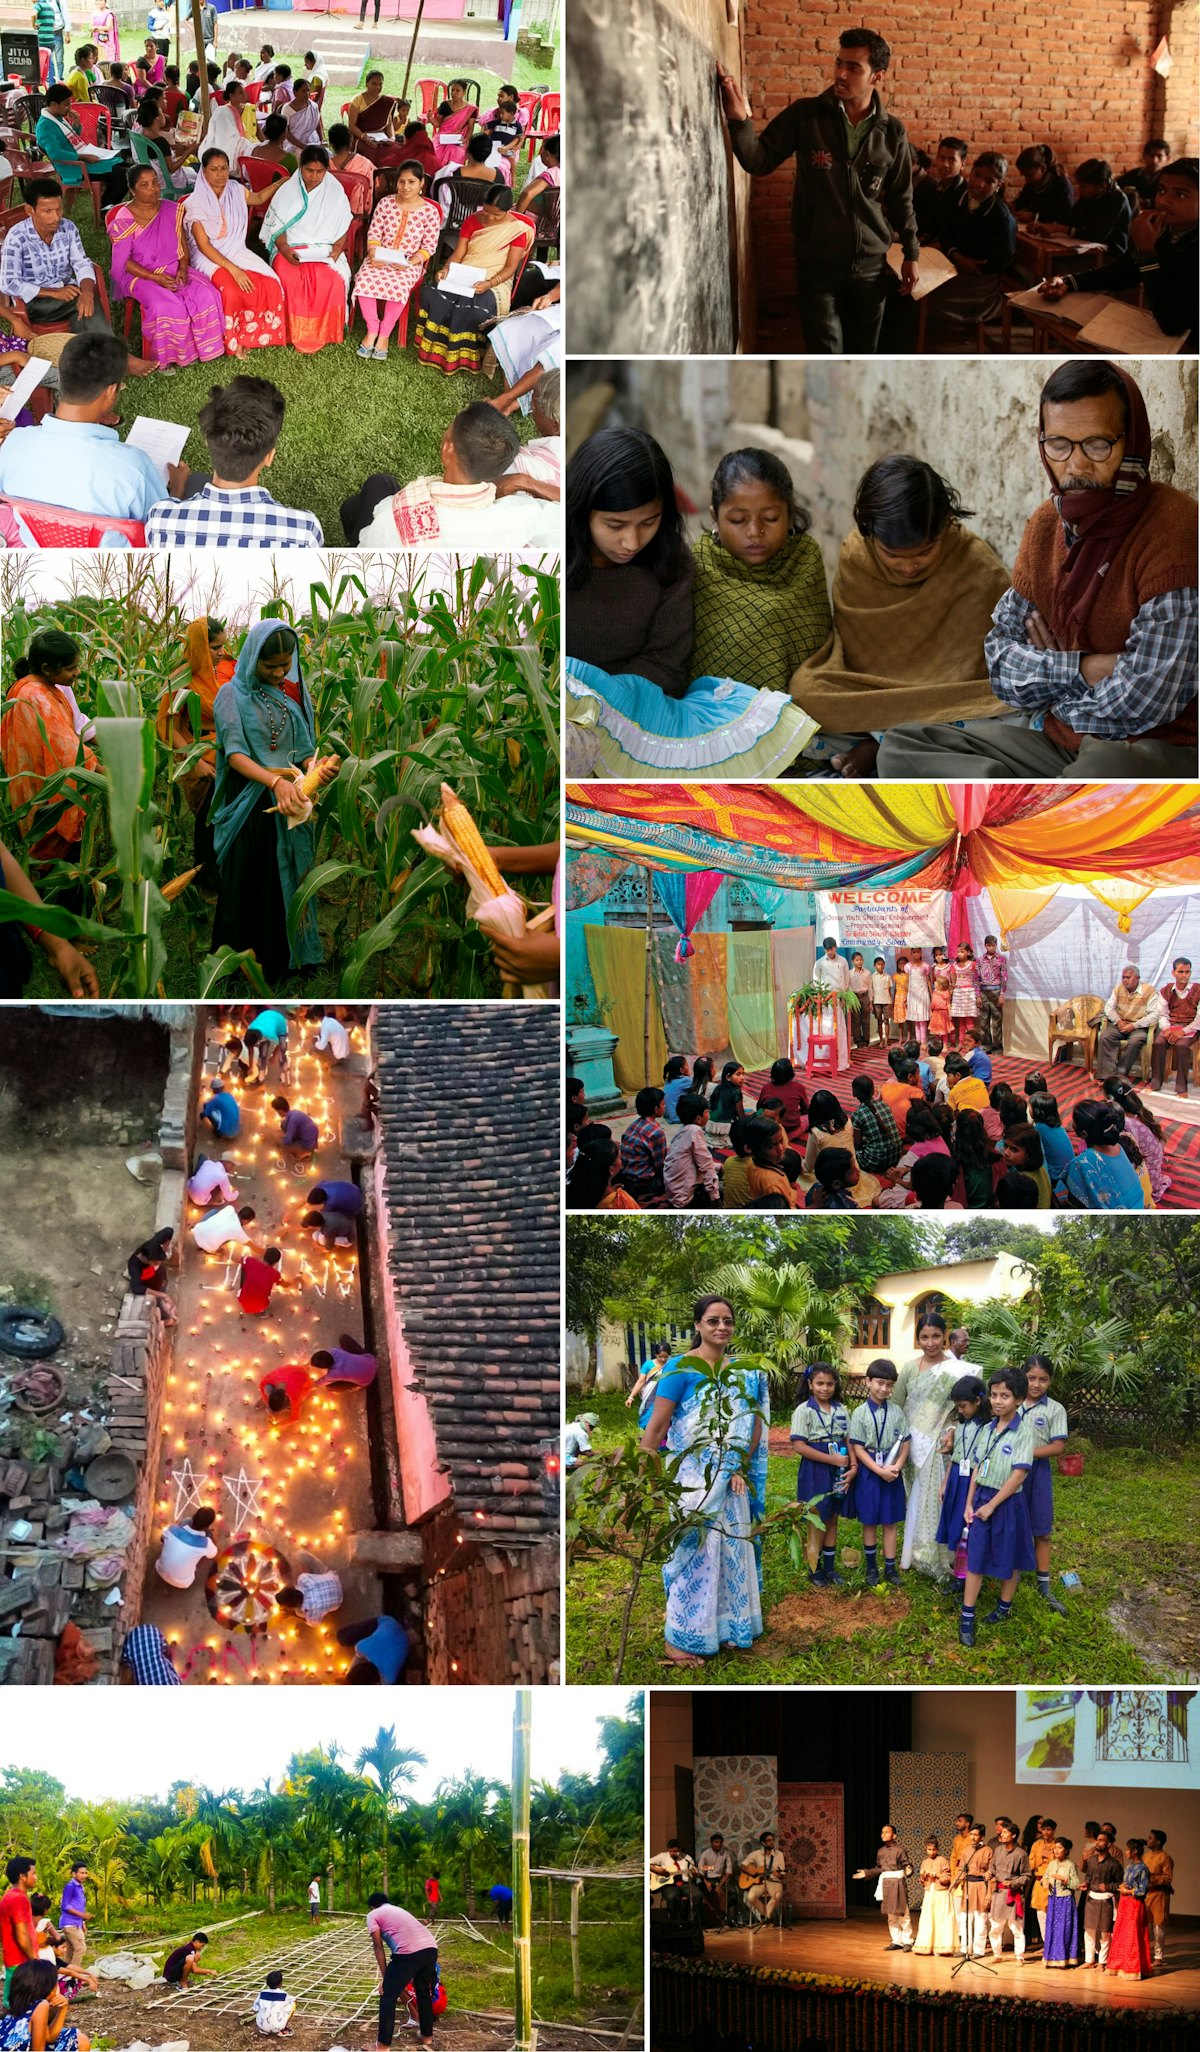 Images of Bahá’í community-building activities in India.